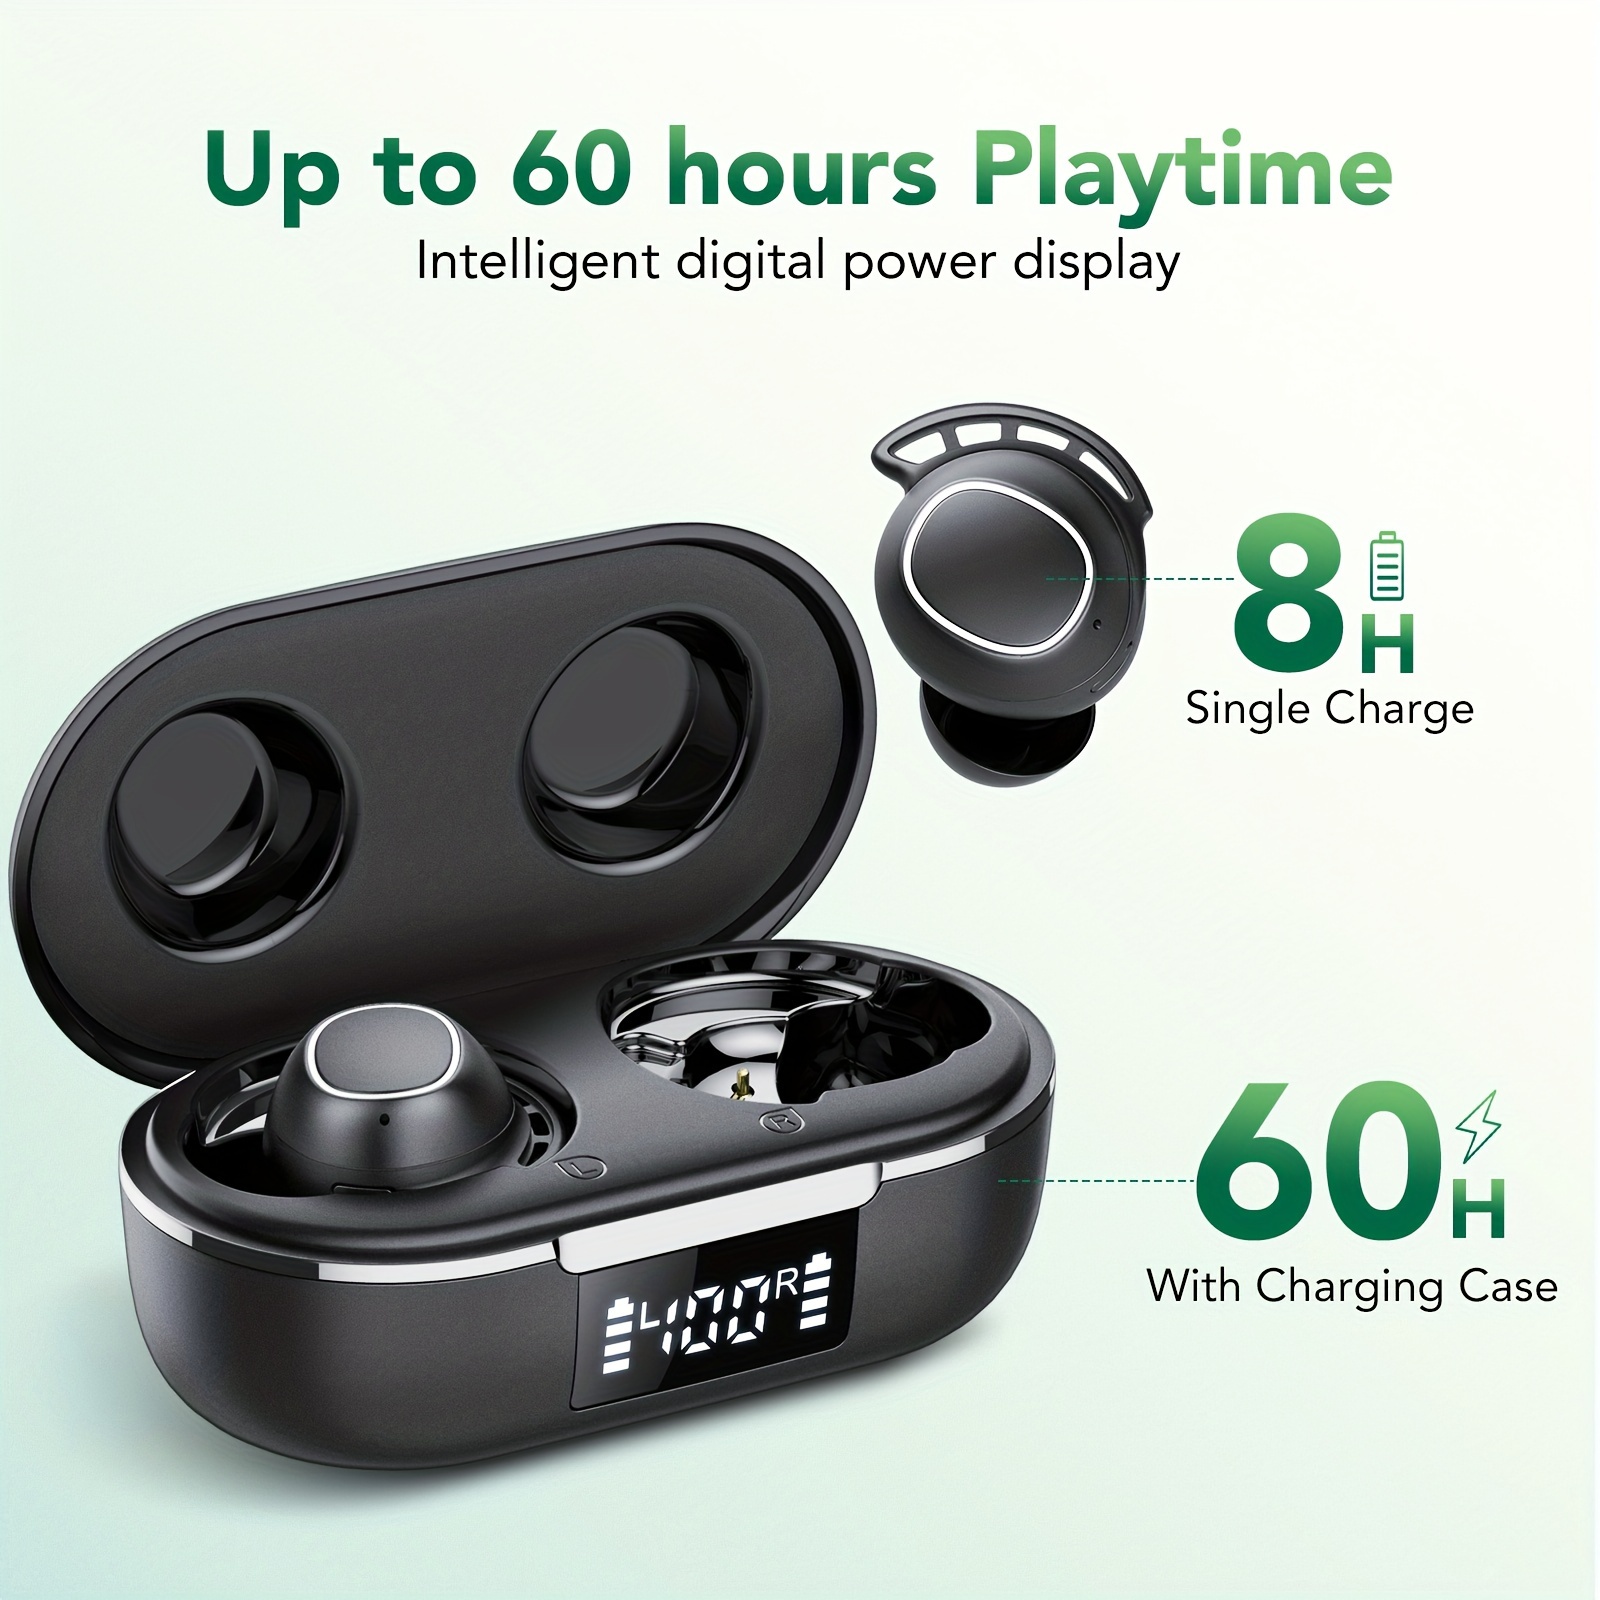 

Hybrid Active Noise Cancelling Wireless Earbuds With 60 Hours Playtime, In Ear Headphones Bt 5.3 Stereo Earphones, Immersive Sound Premium Deep Bass Headset Black